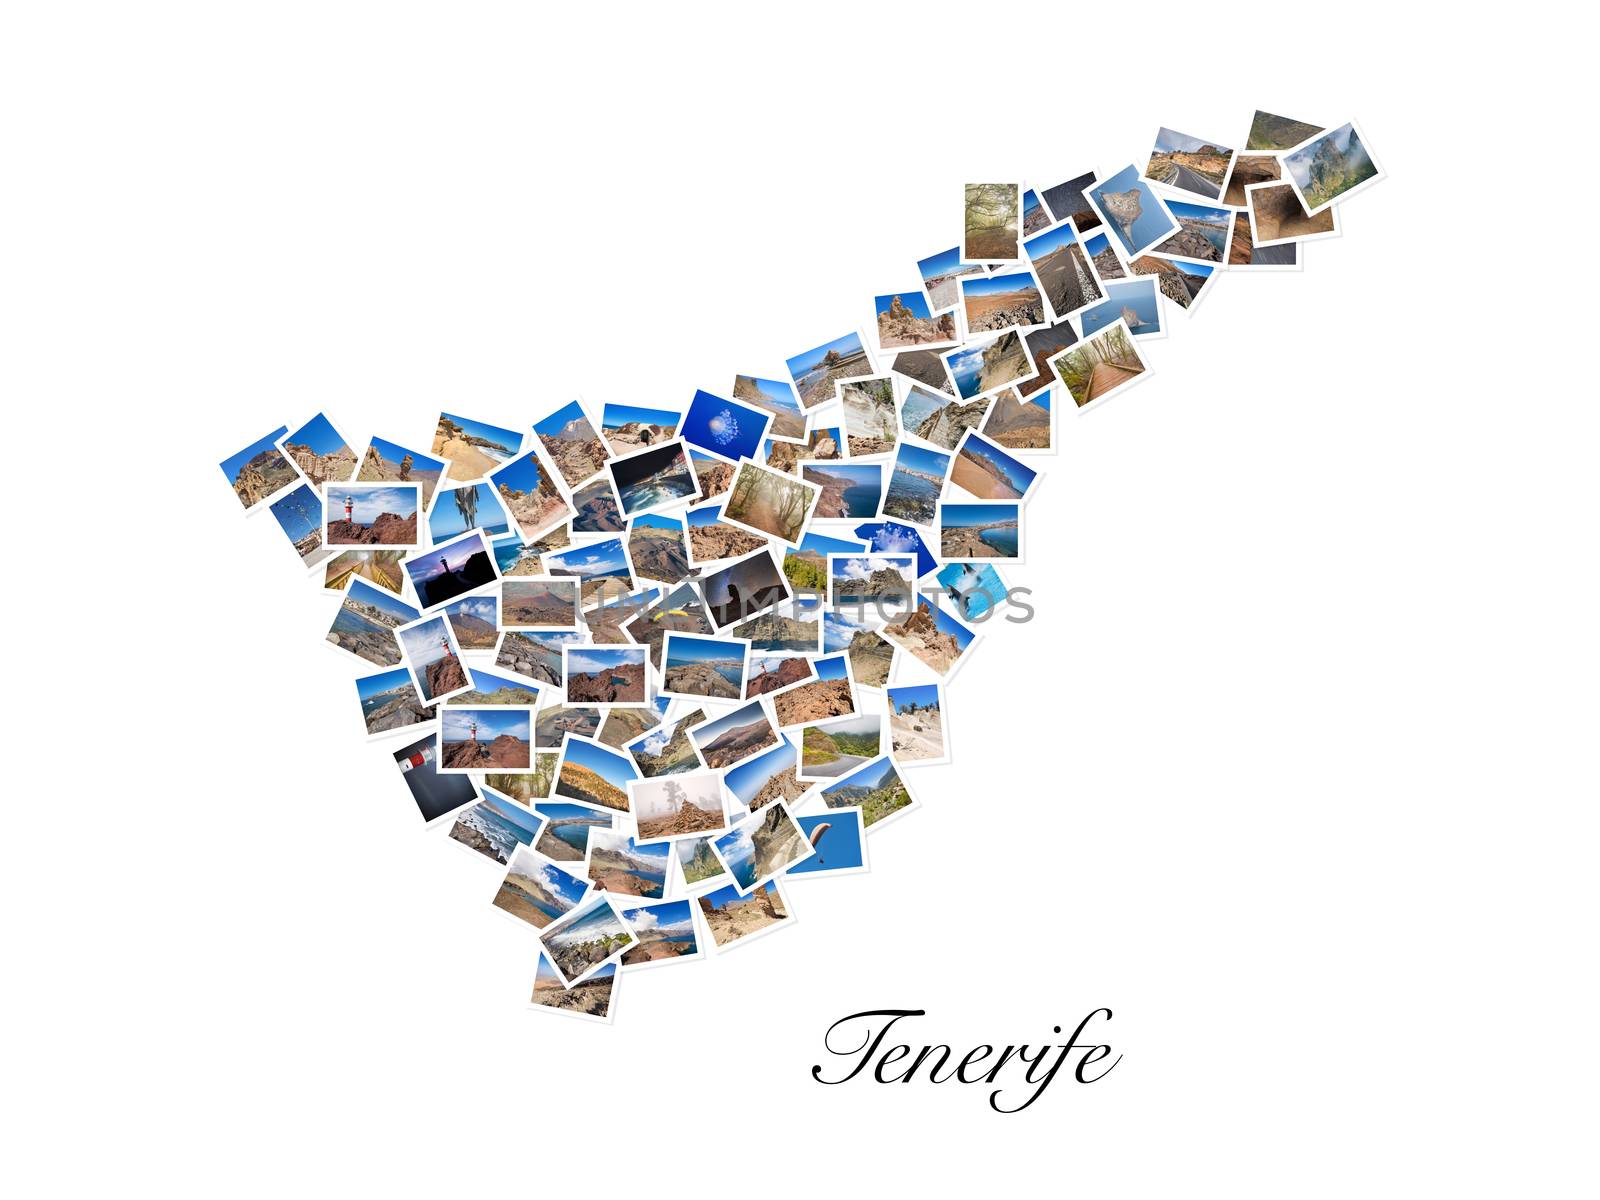 A collage of my best travel photos of Tenerife, forming the shape of Tenerife island, version 1.